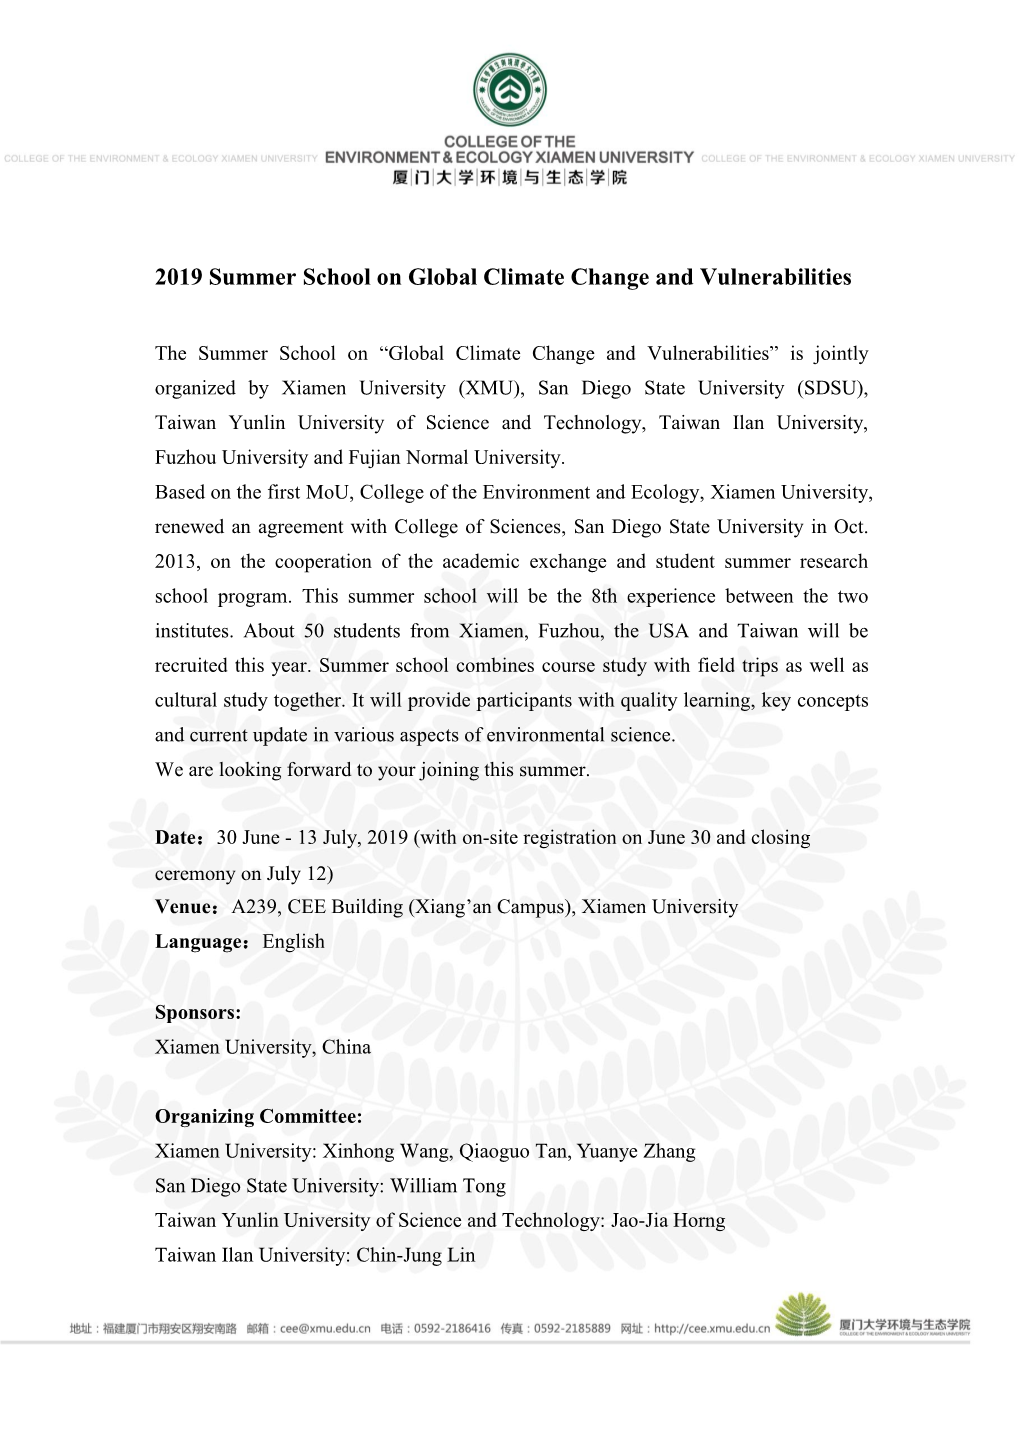 2019 Summer School on Global Climate Change and Vulnerabilities